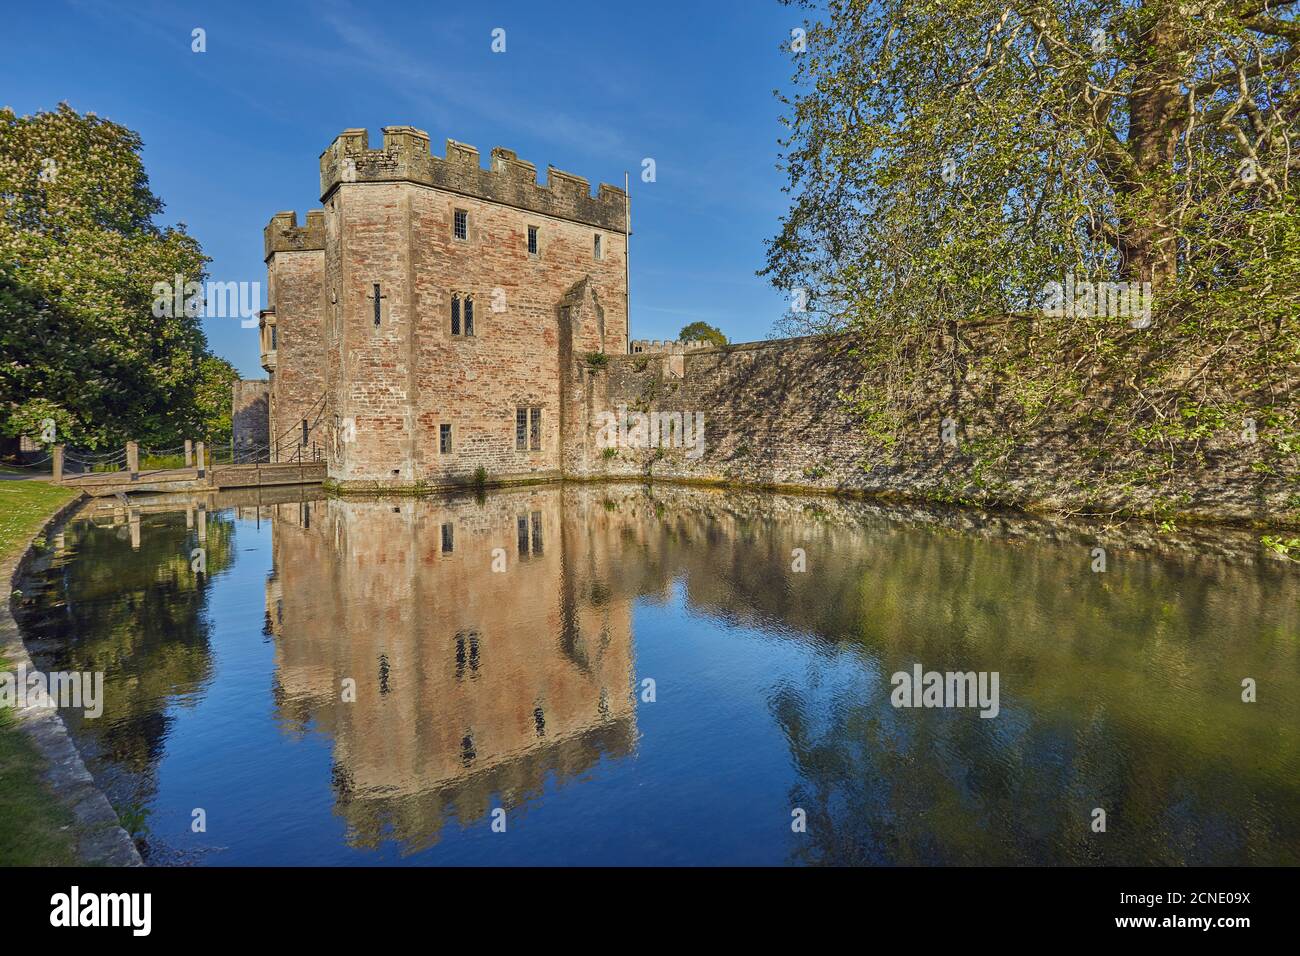 The historic Bishop's Palace and moat, Wells Cathedral, in Wells, Somerset, England, United Kingdom, Europe Stock Photo